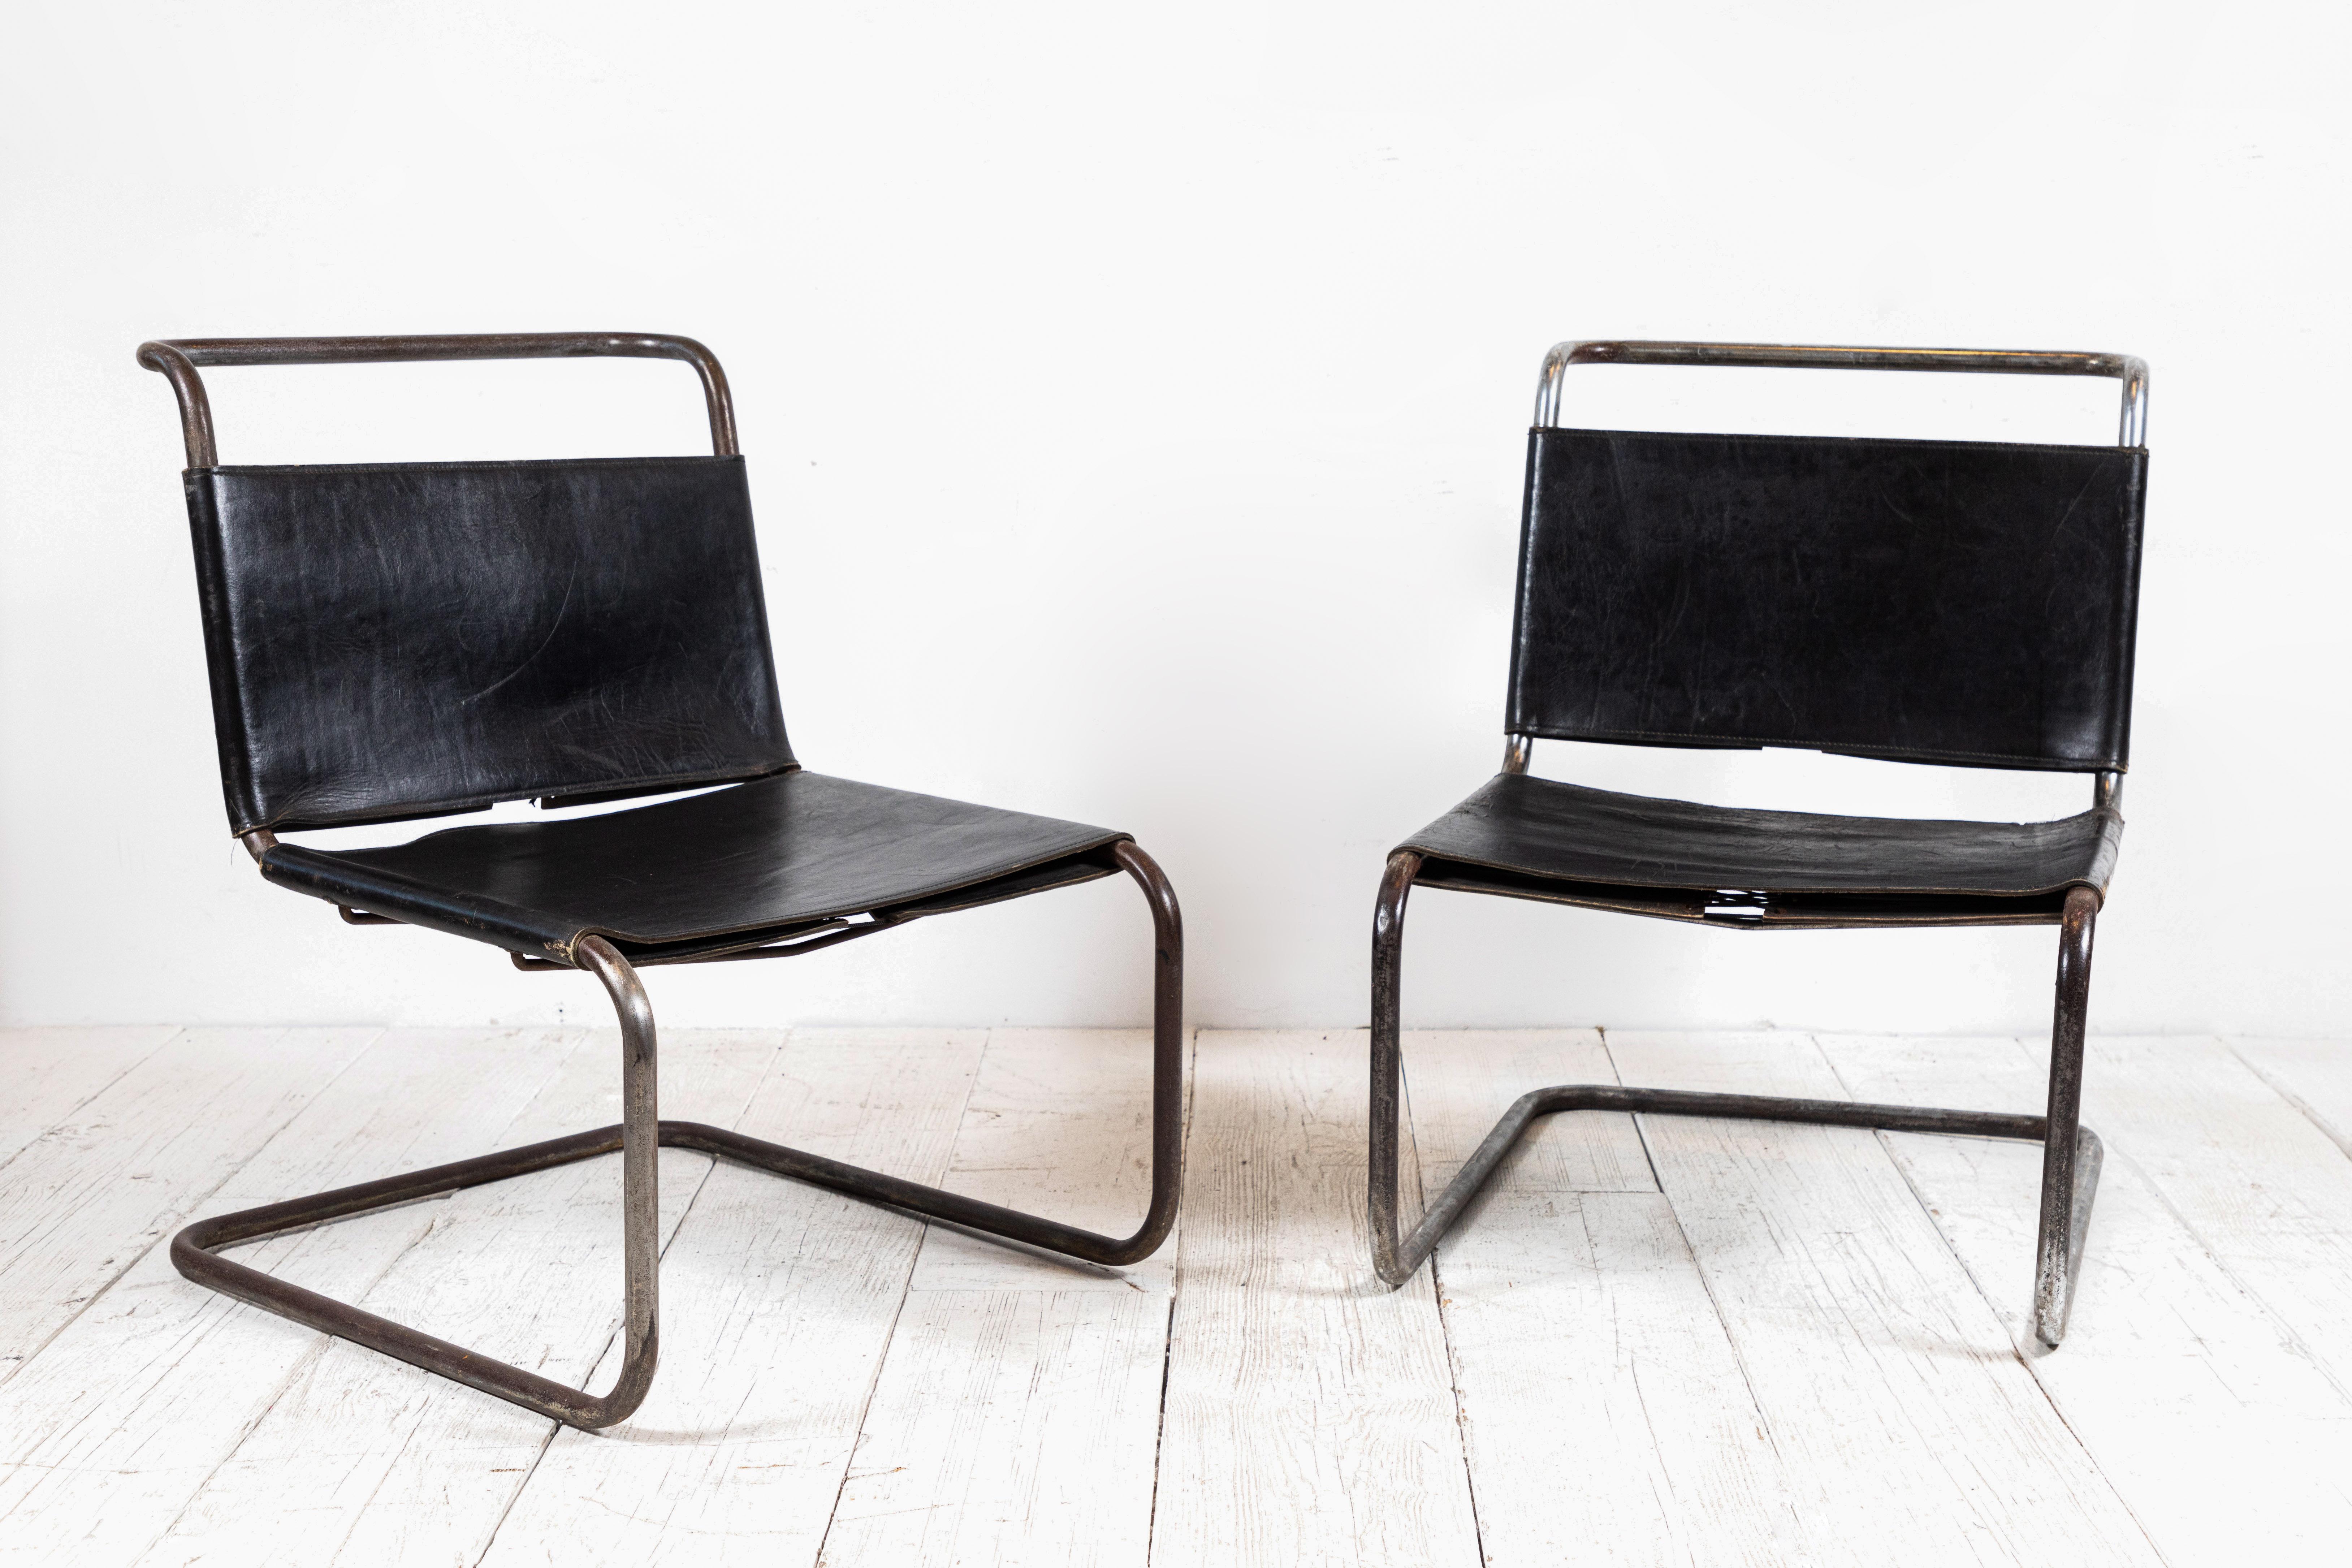 French pair of black leather chairs with chrome frame. The leather and chrome are both aged to a beautiful patina. The leather seat and back are held together with lashings.